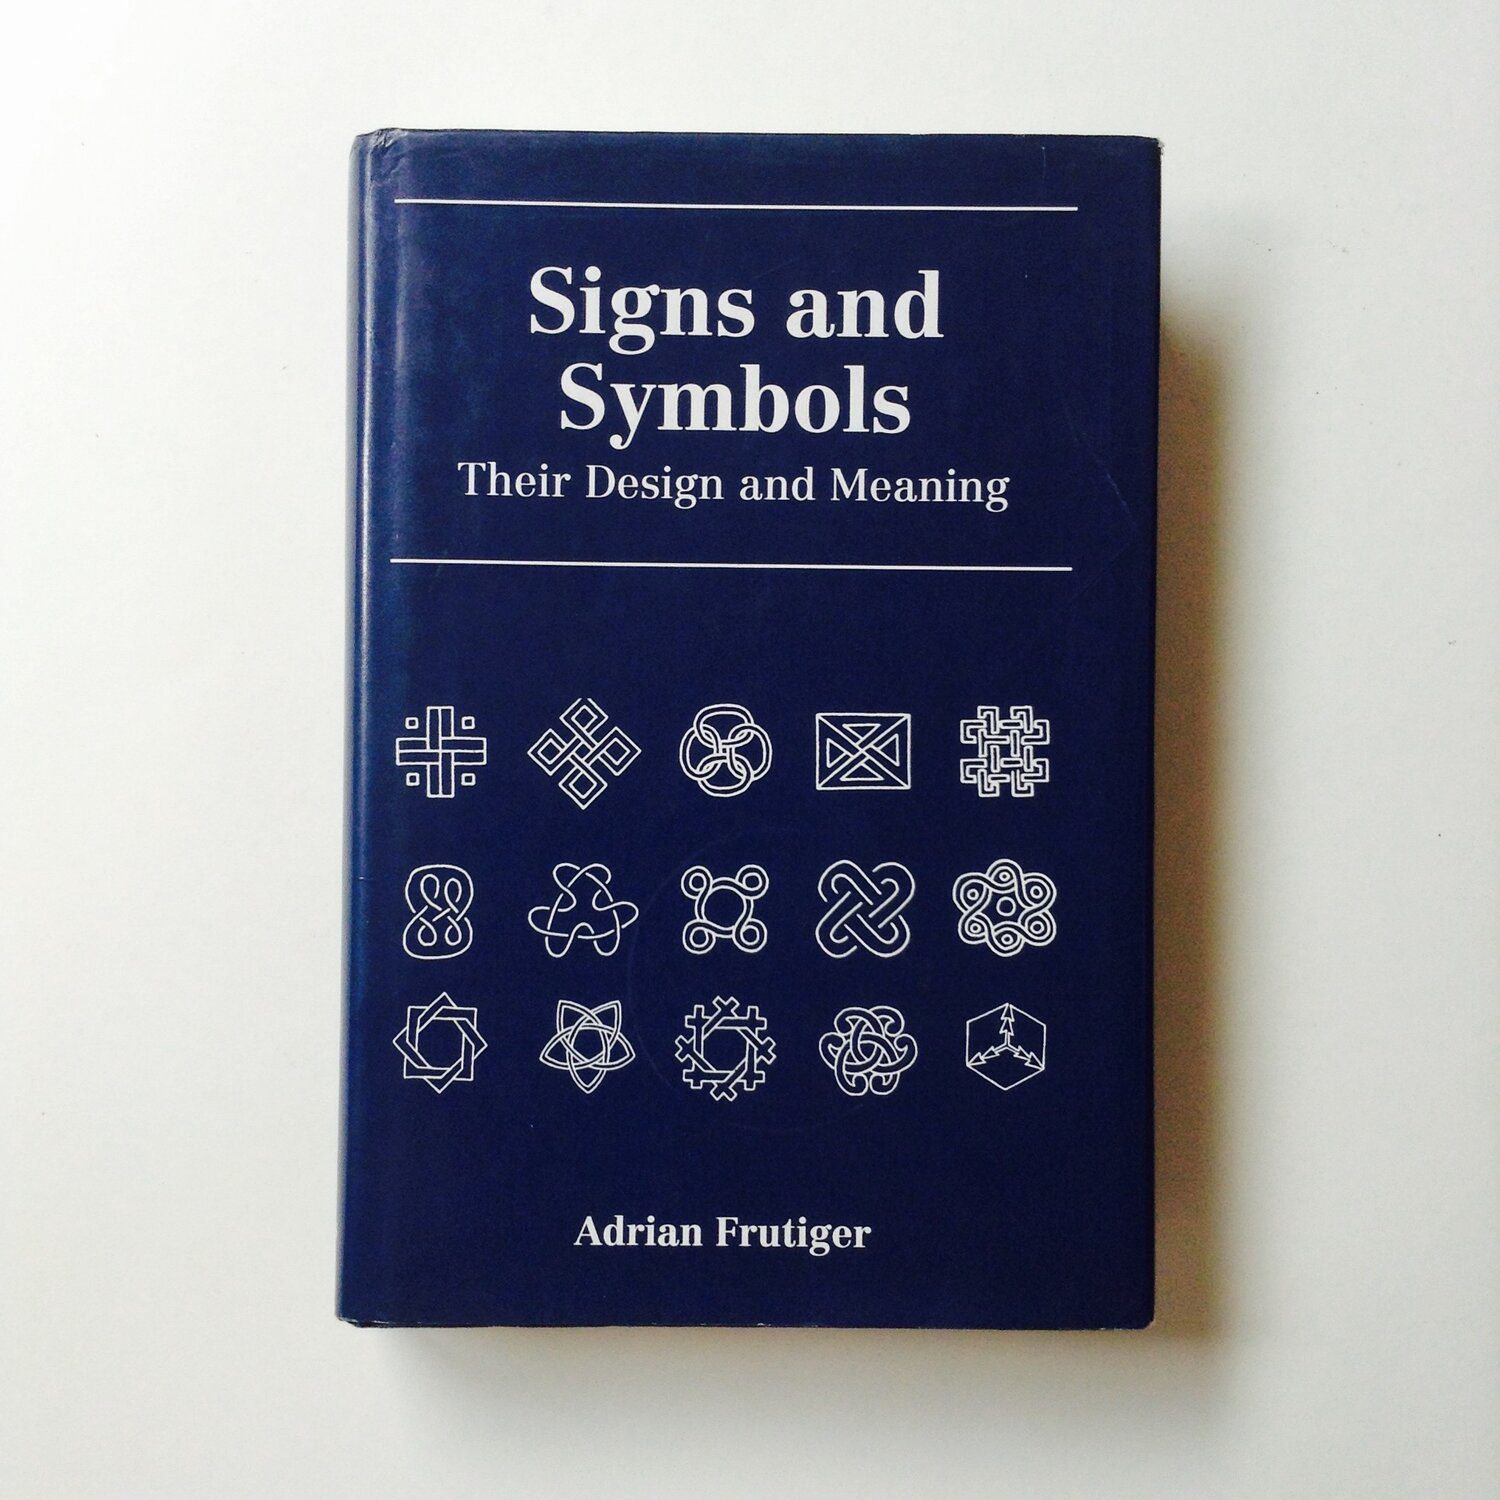 'Signs and Symbols: Their Design and Meaning' by Adrian Frutiger طراح گرافیک